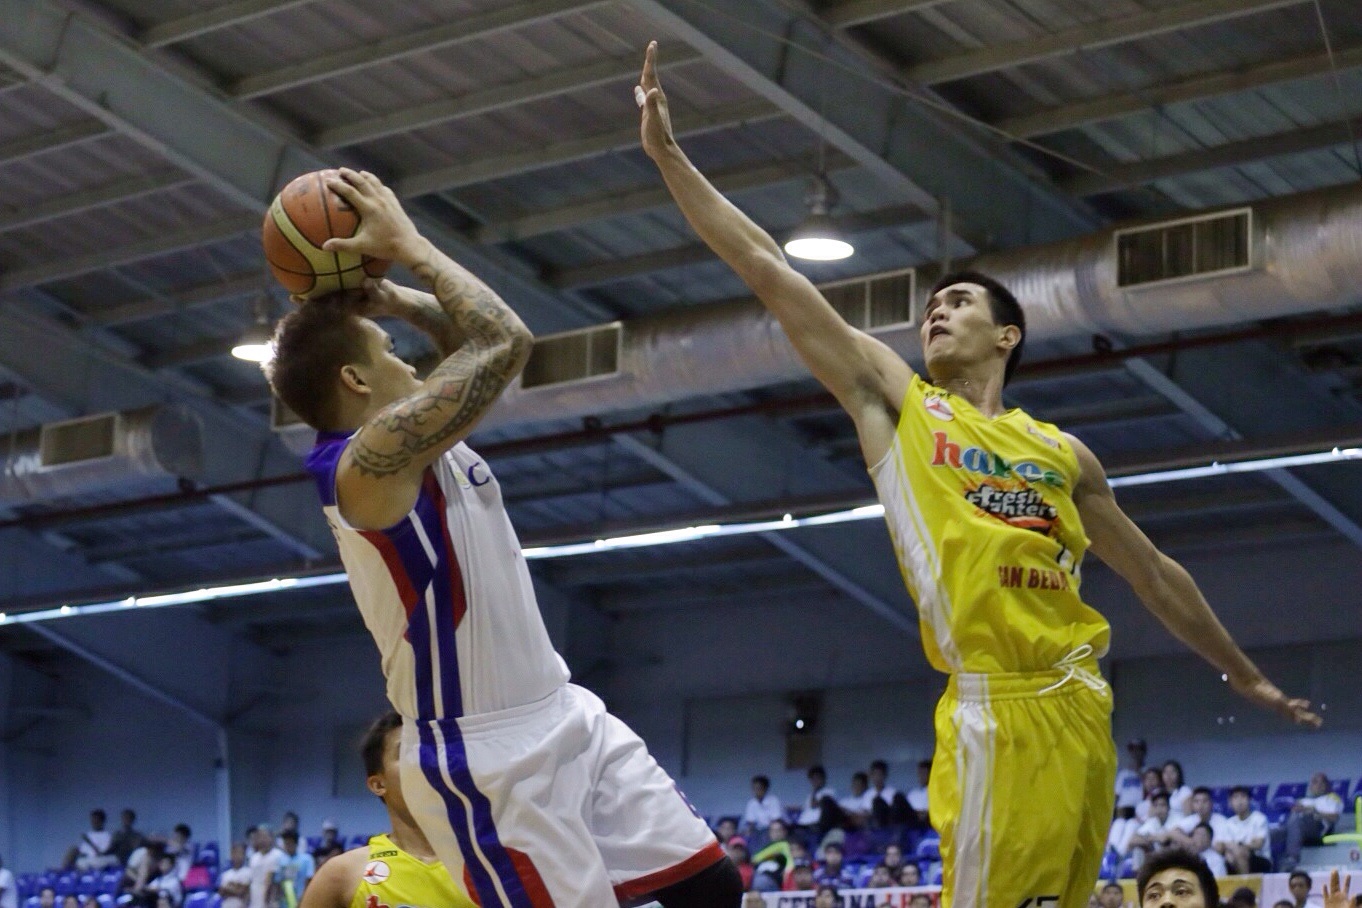 Eloy Poligrates shoots over Troy Rosario. Photo by Tristan Tamayo/INQUIRER.net